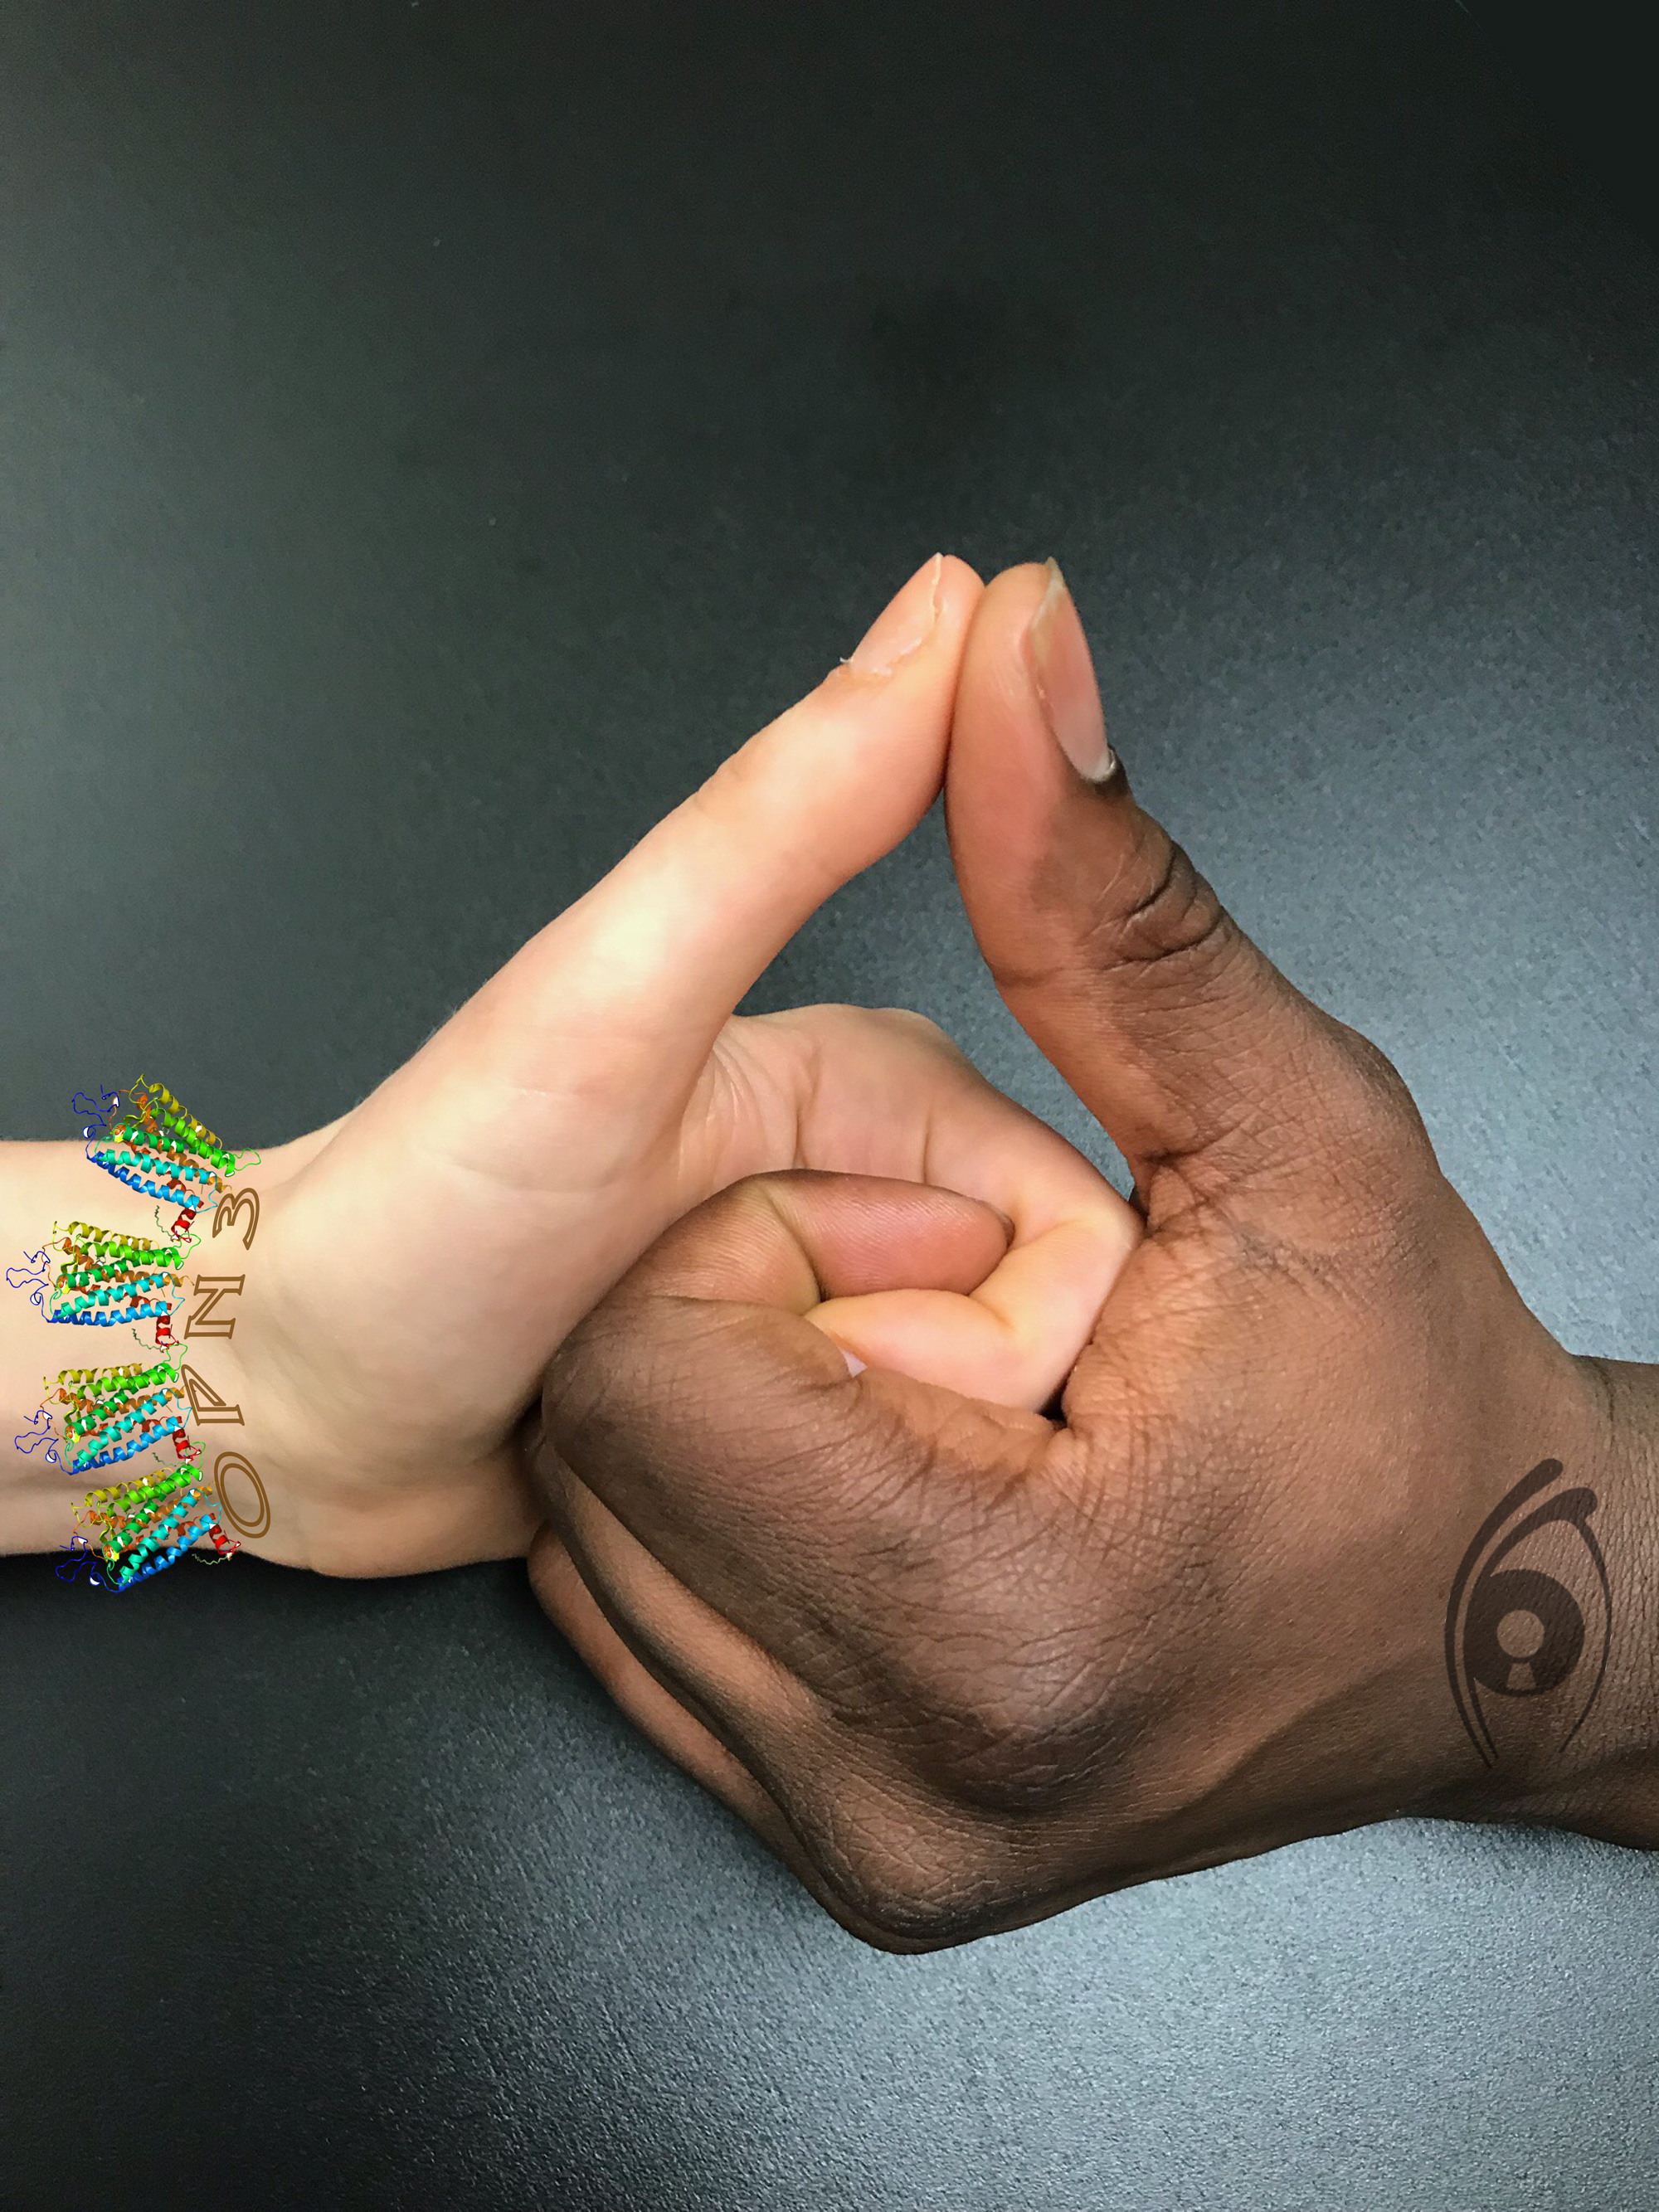 Two hands, one light and the other dark, thumb wrestle against a black background. The lighter hand has a bracelet of light-sensitive proteins. The darker hand has a eye icon.